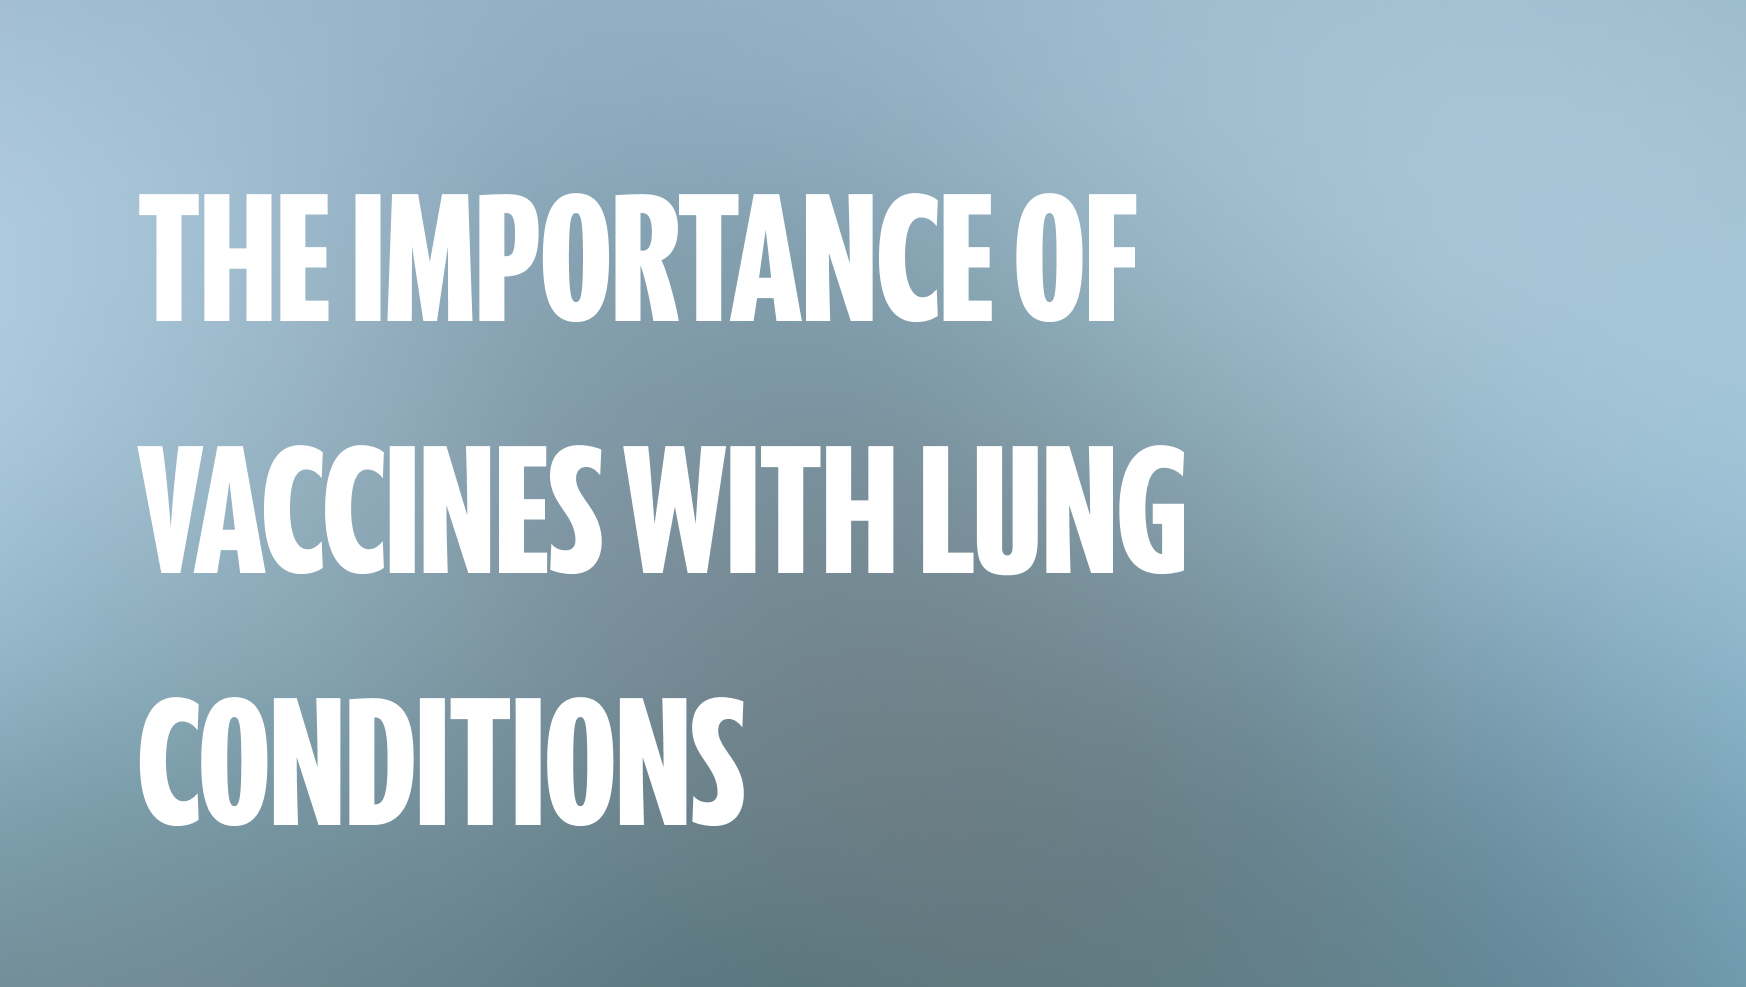  The Importance of Vaccines with Lung Conditions